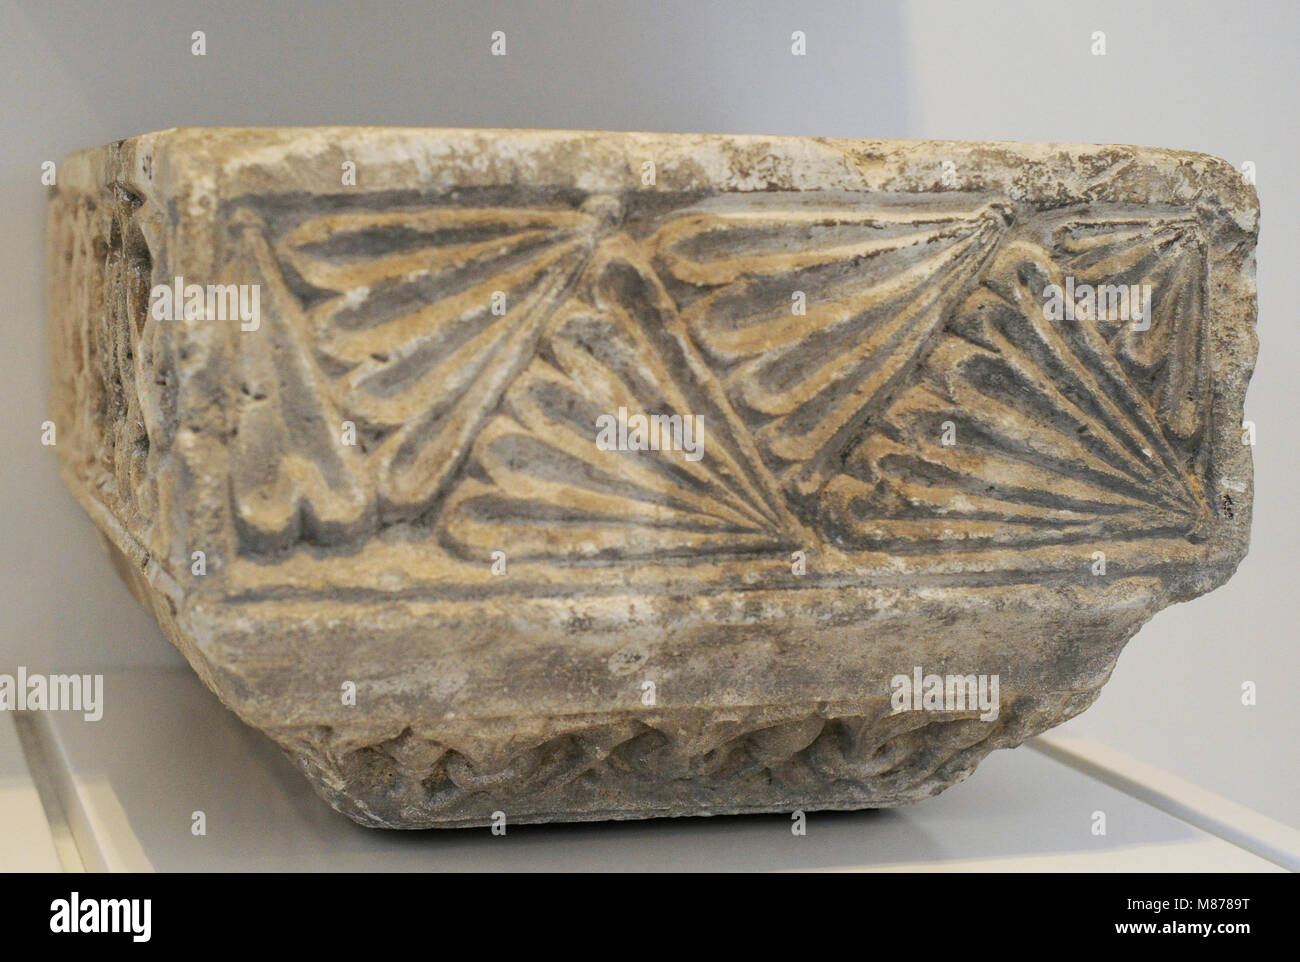 Fragment of a funerary monument from the Basilica of St Severin in Cologne, Germany, c. 1050. Limestone. Schnütgen Museum. Cologne, Germany. Stock Photo